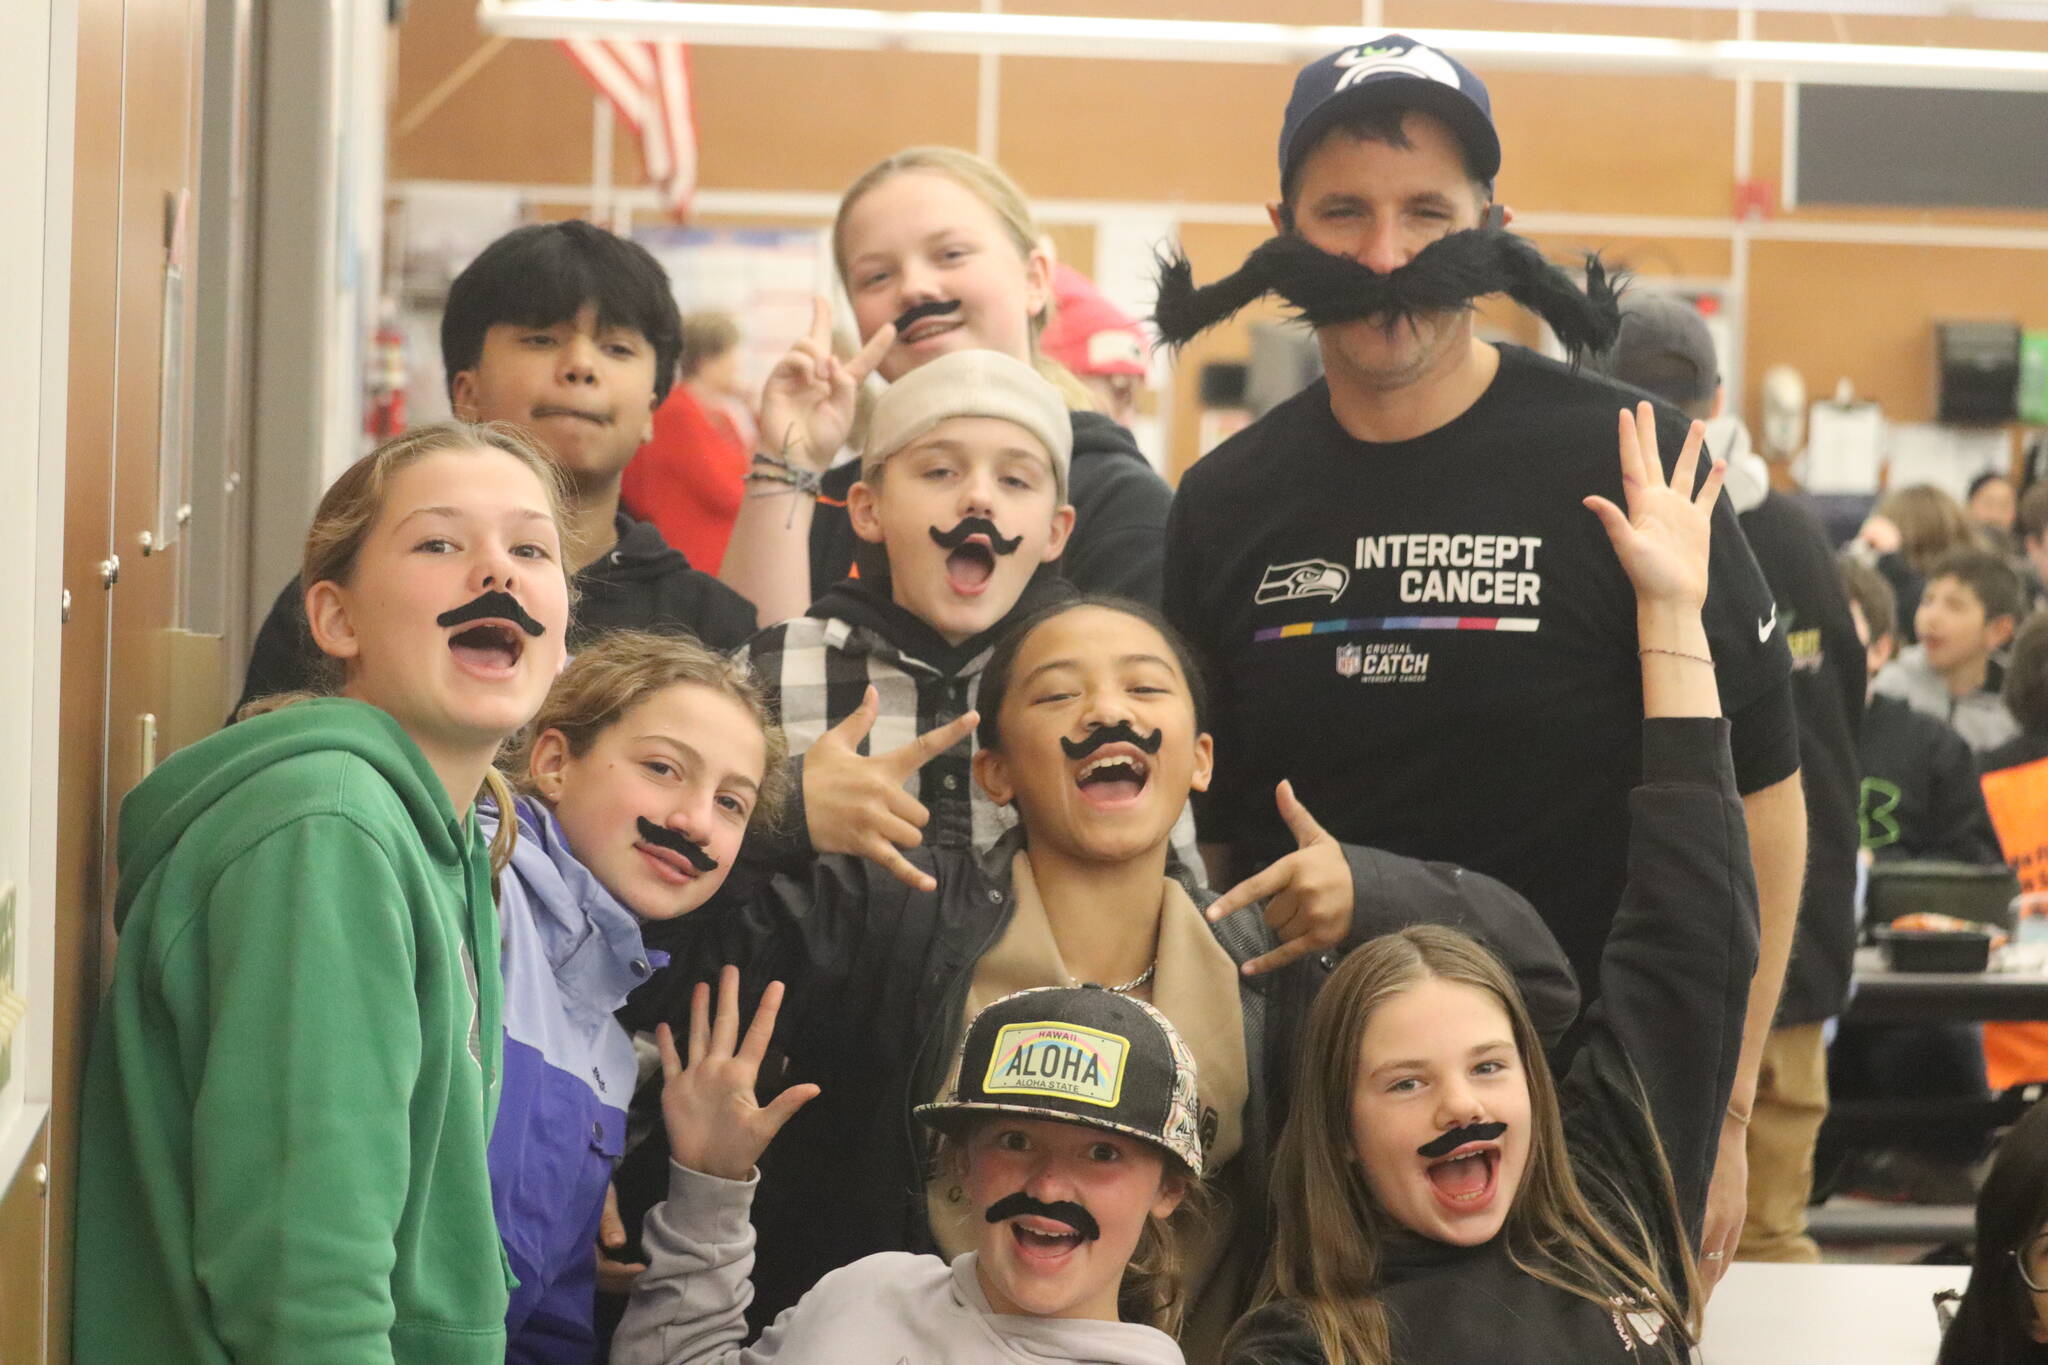 Floyd Dryden Middle School teacher James White poses with seventh graders with mustaches as a way of recognizing Movember, a movement raising awareness of men’s health issues throughout the month of November. (Jonson Kuhn / Juneau Empire)